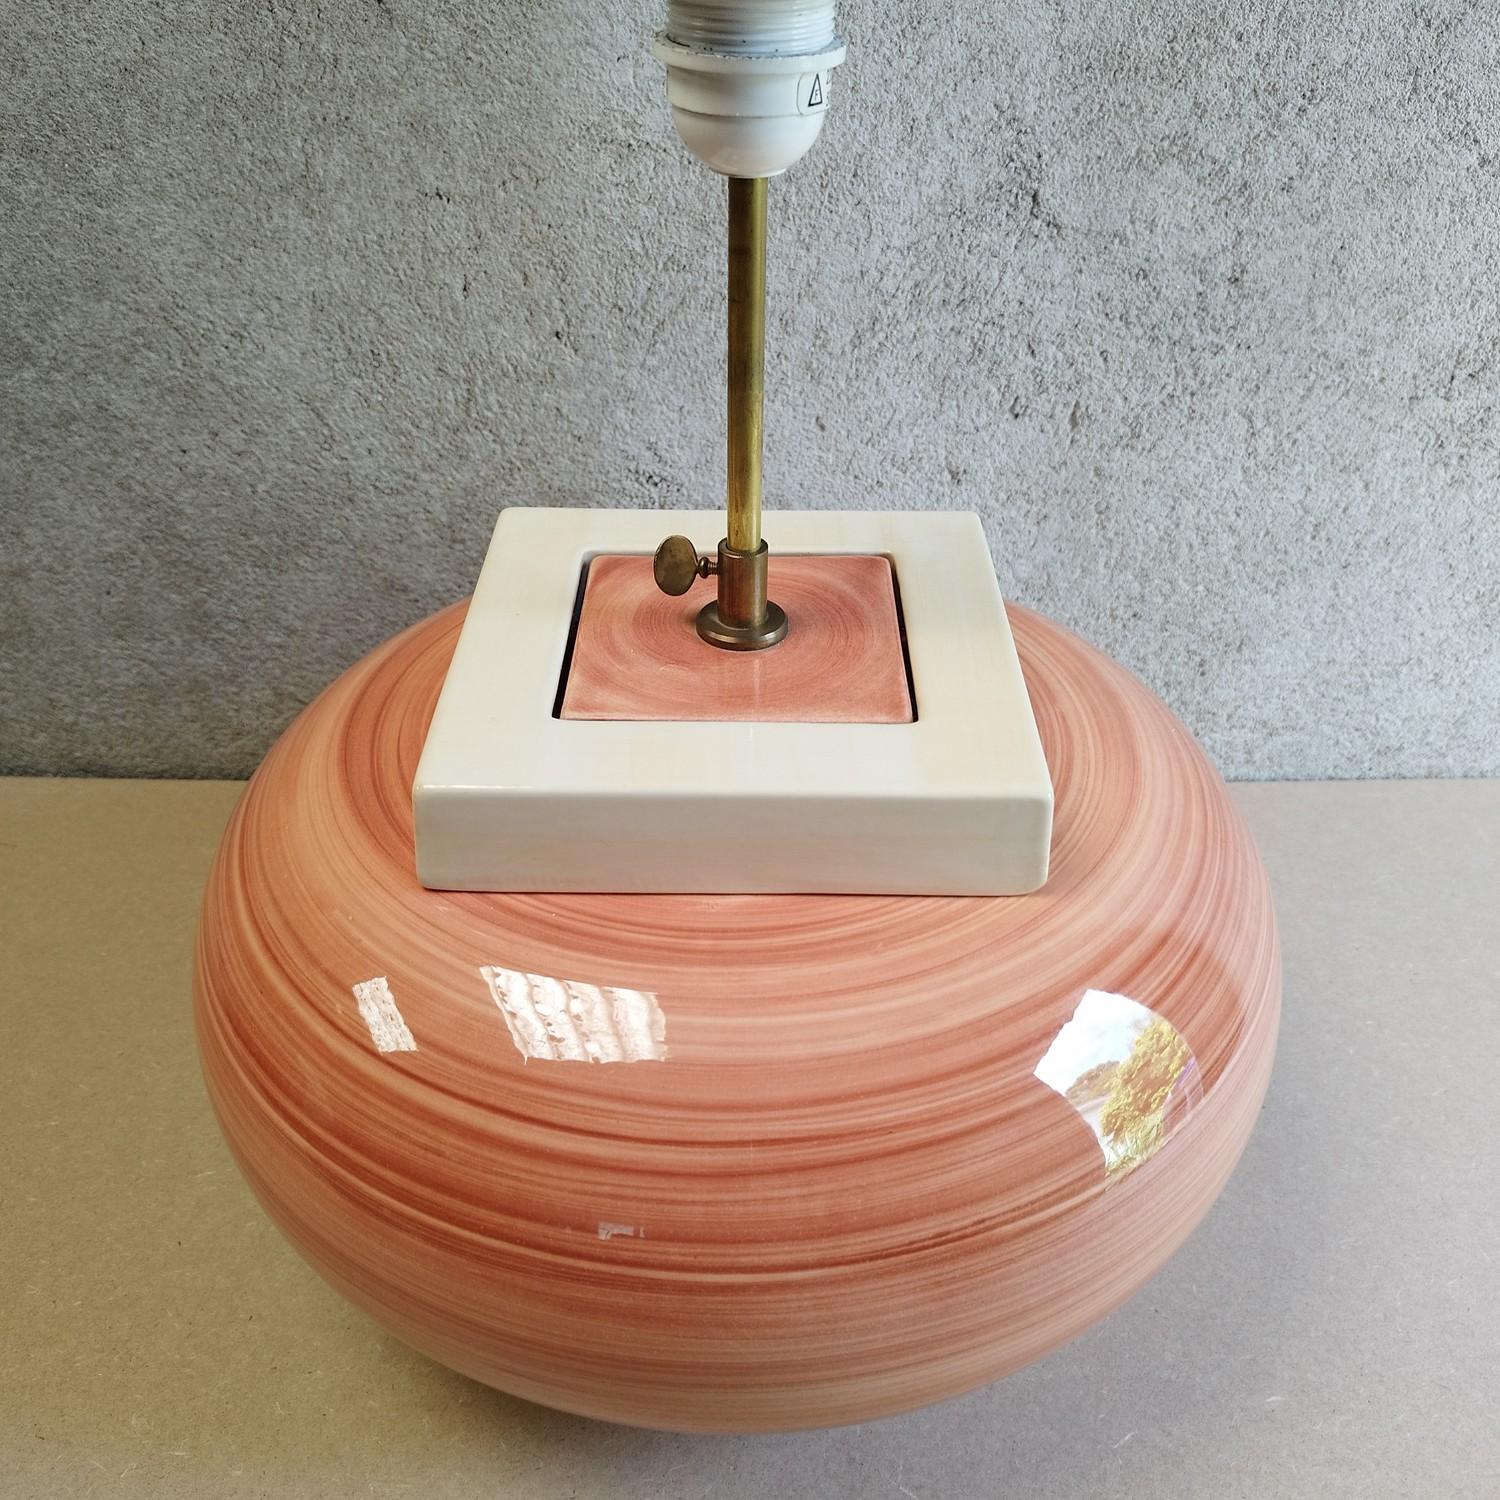 Large ceramic lamp by Kostka. The shape and colors are typical of the French 1980's style. The brass stand that holds the socket is adjustable in height. One tiny chip on the base barely visible when the lamp is standing. It's wired for Europe, but